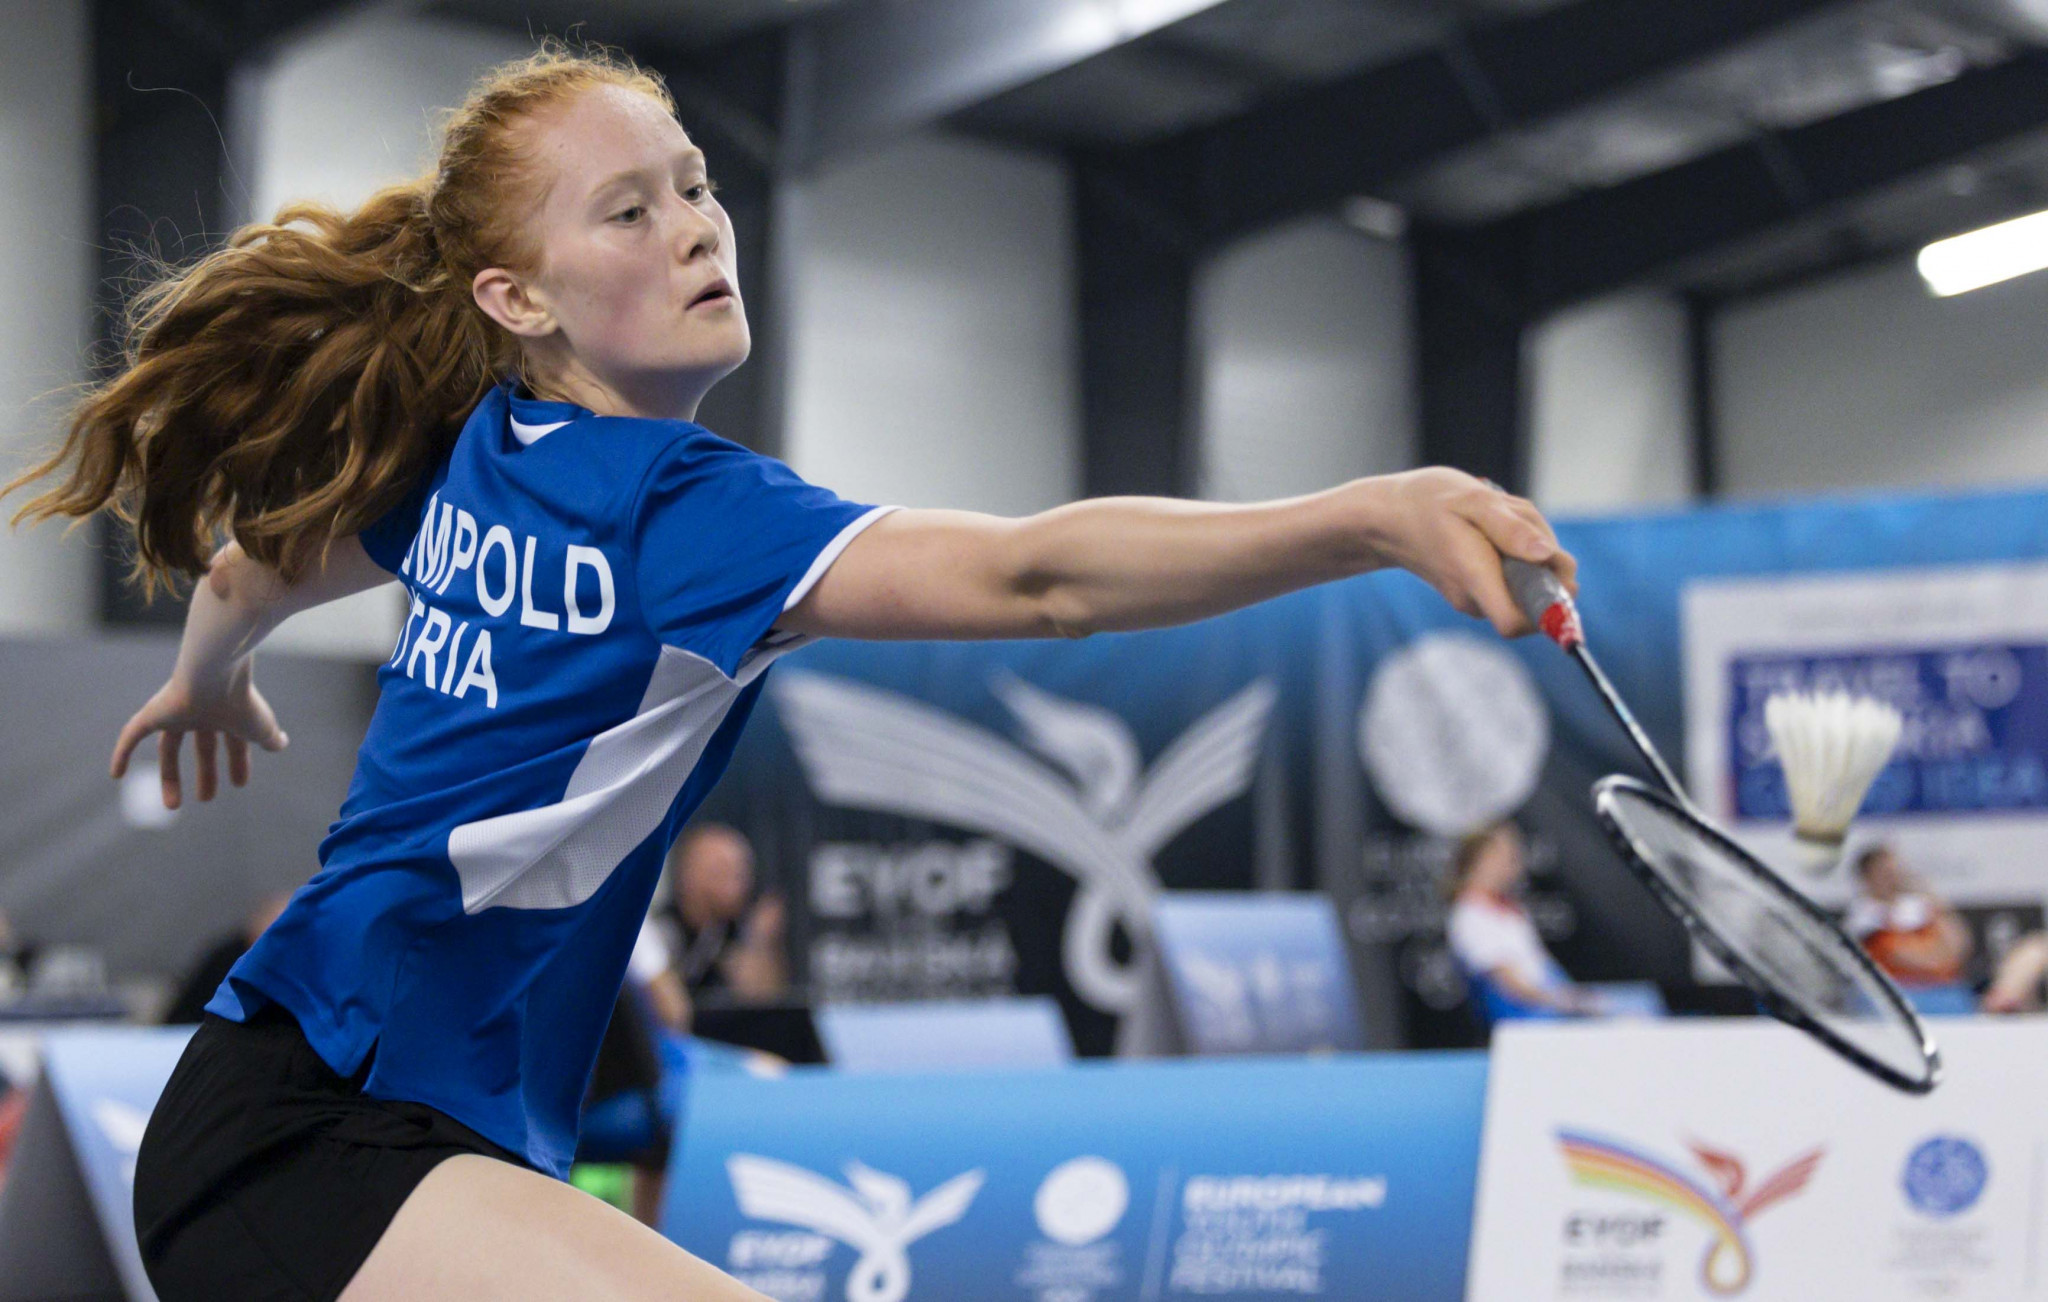 Austria's Anja Rumpold was eliminated from the girls' badminton tournament after suffering a heavy 21-14, 21-18 defeat to Croatia's Jelena Buchberger ©EYOF Banská Bystrica 2022